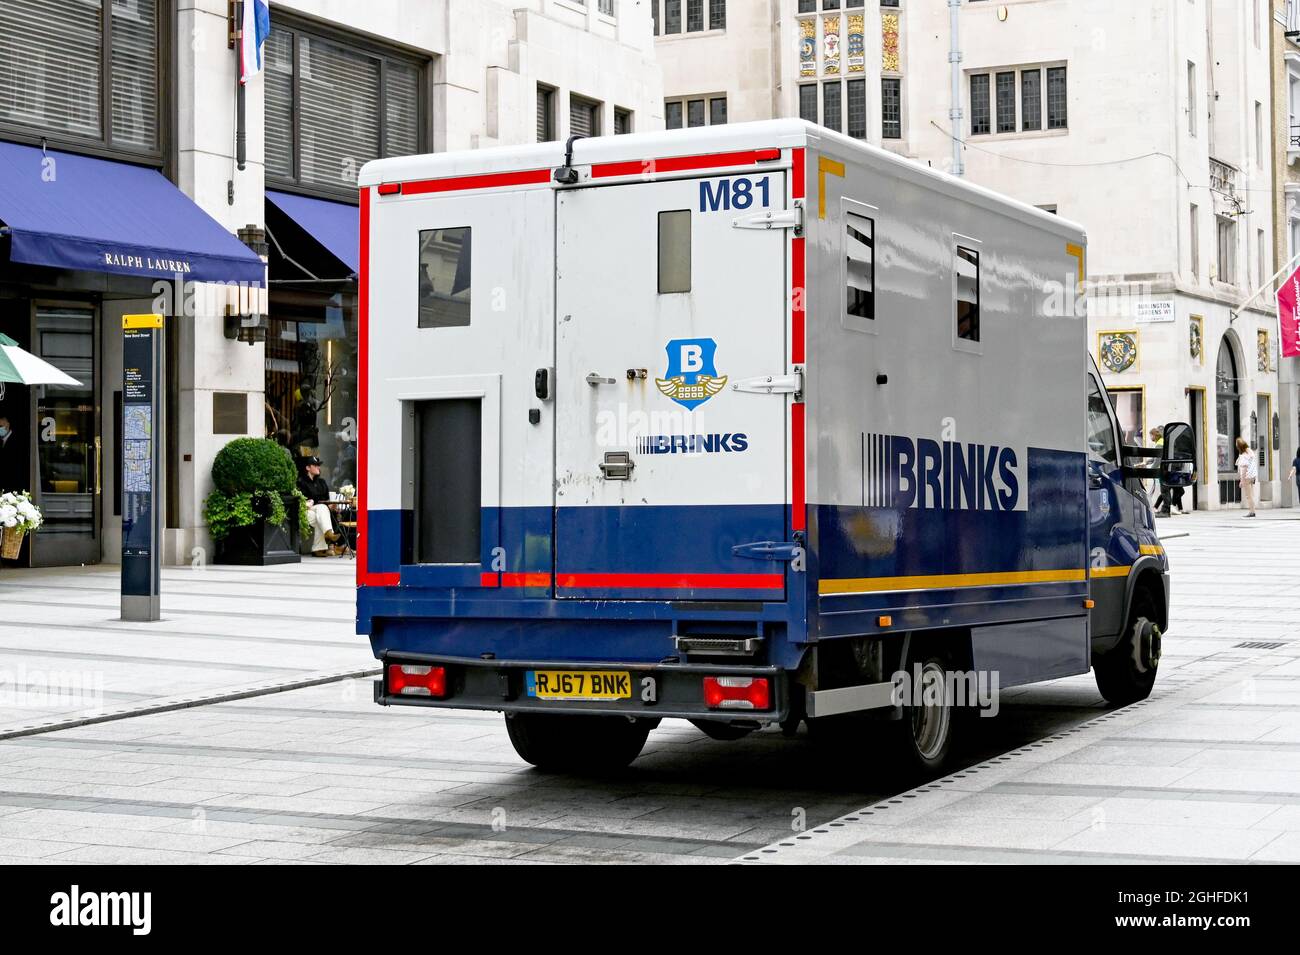 London, England - August 2021: Security van operated by Brinks parked on New Bond Street in central London Stock Photo